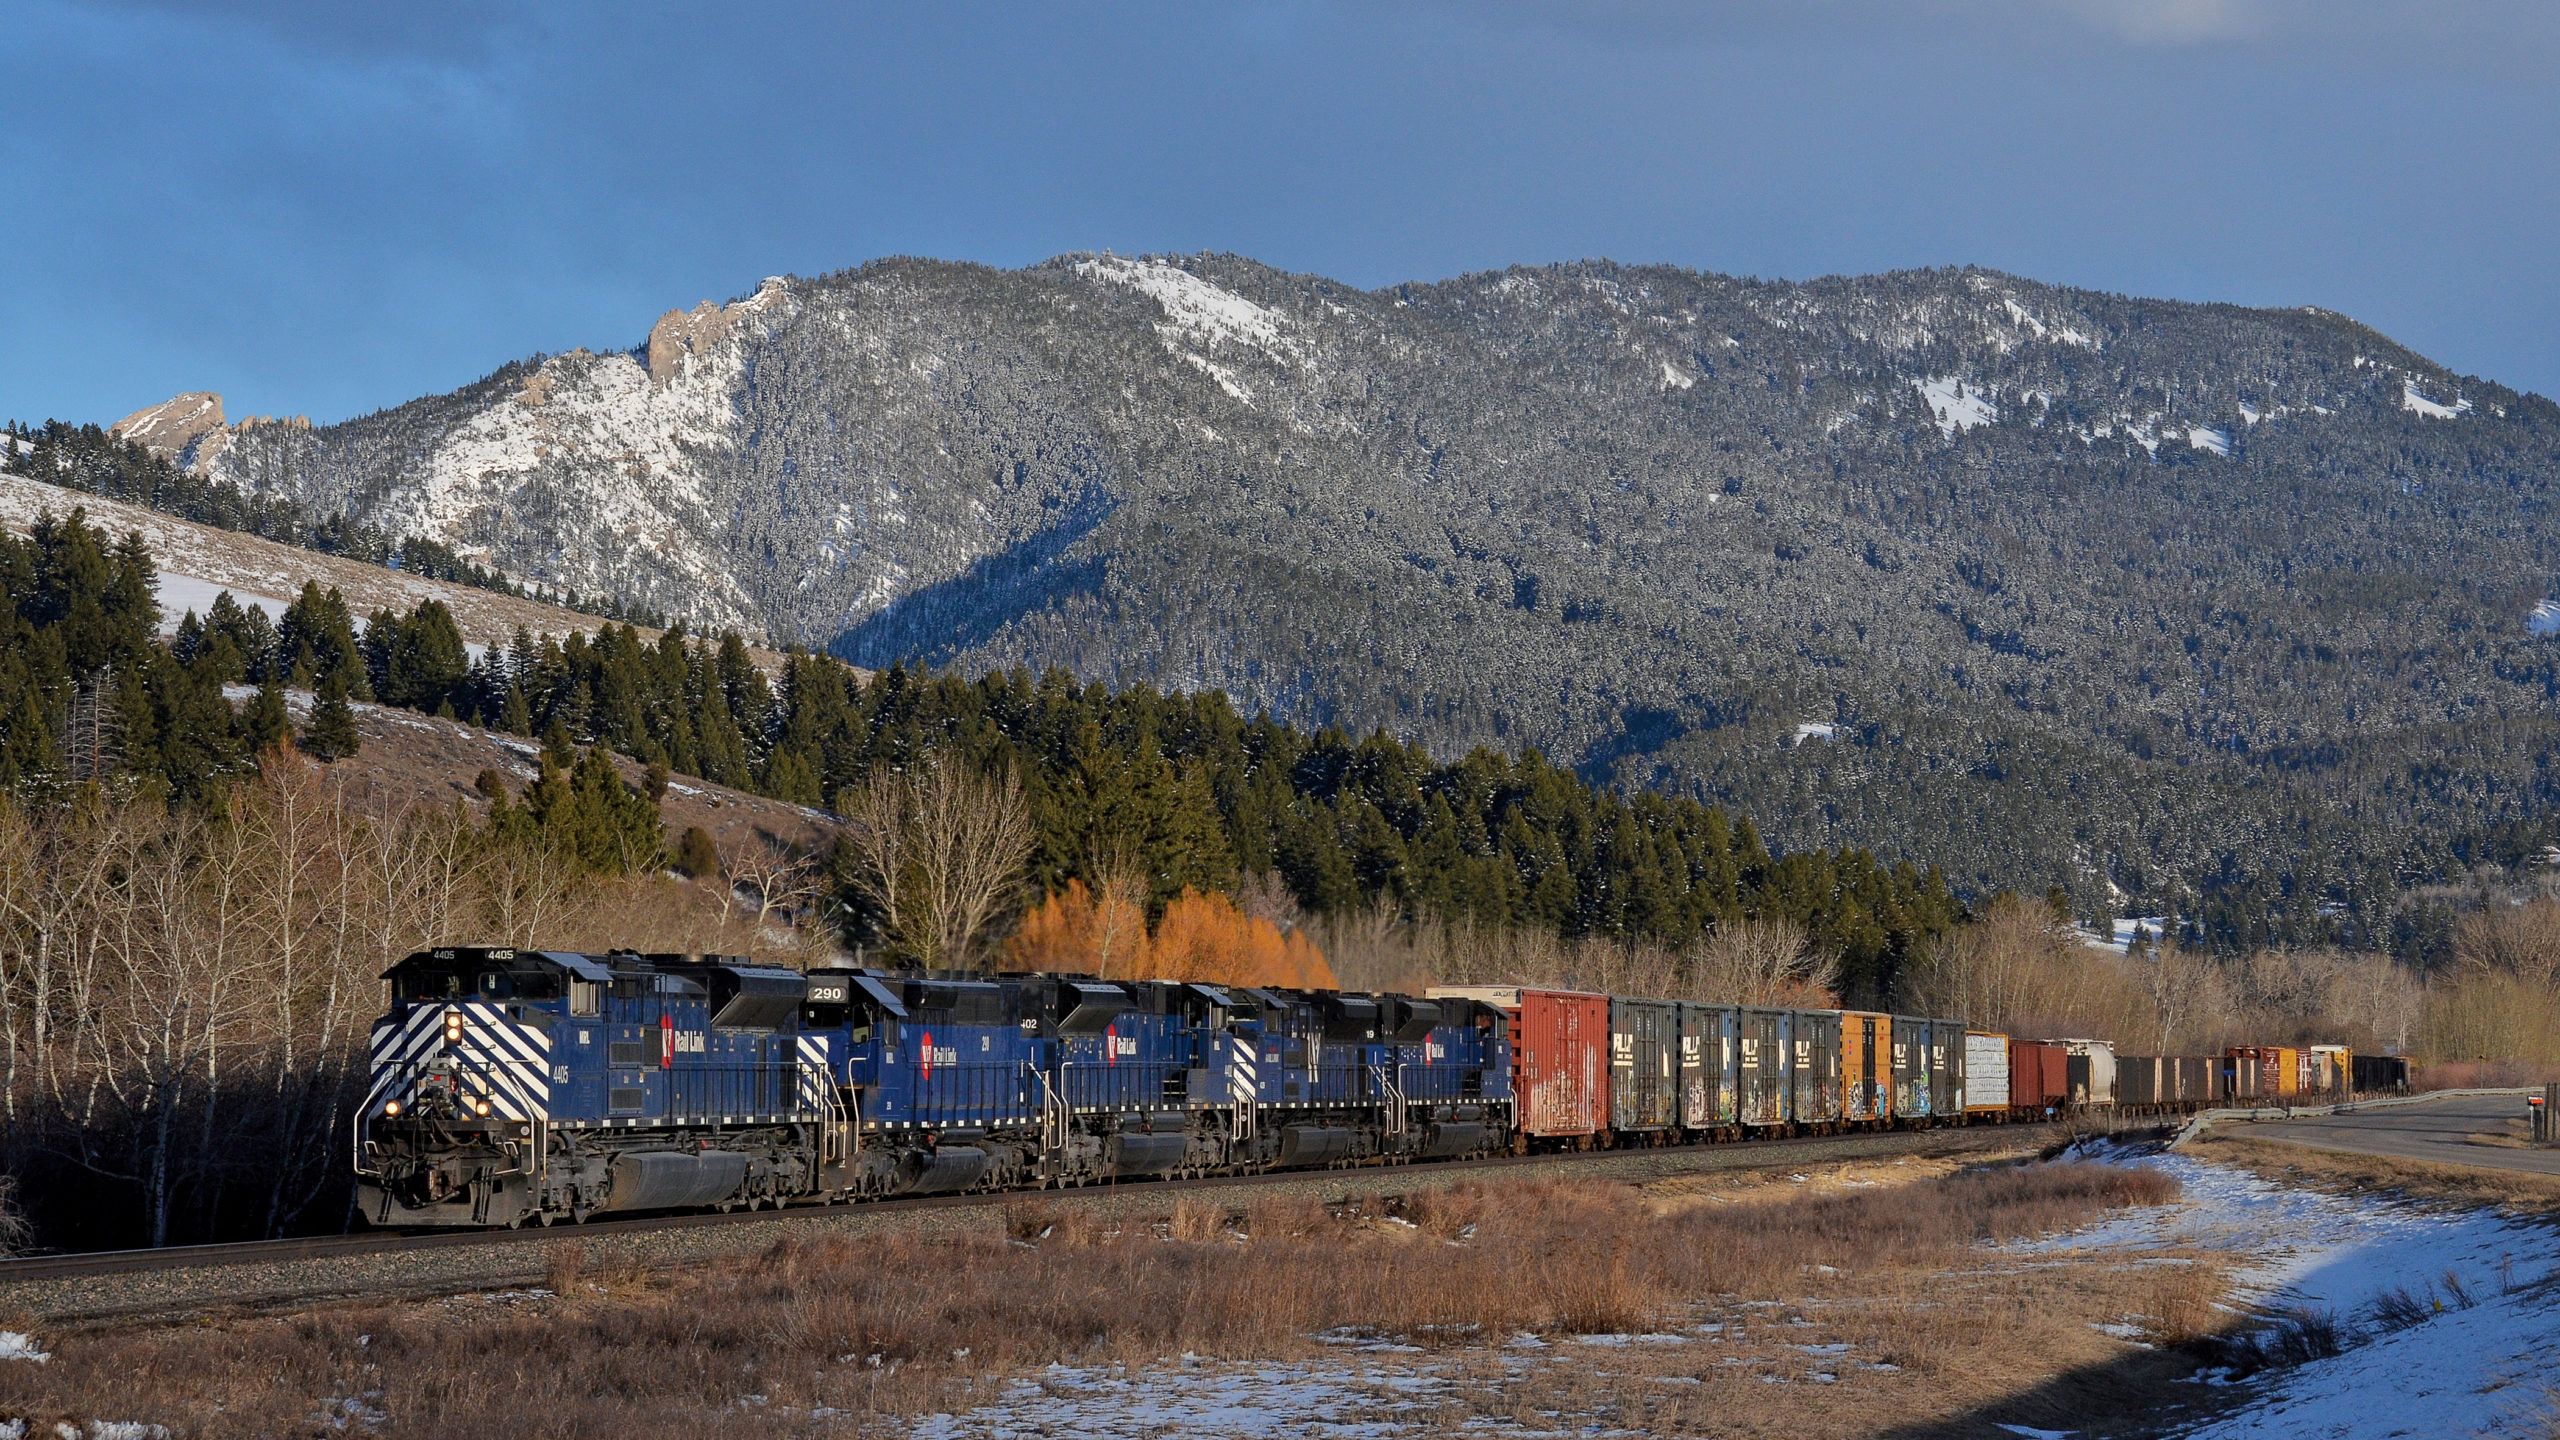 Pictured: MRL manifest approaching Bozeman, Mont. (Bruce Kelly Photograph)